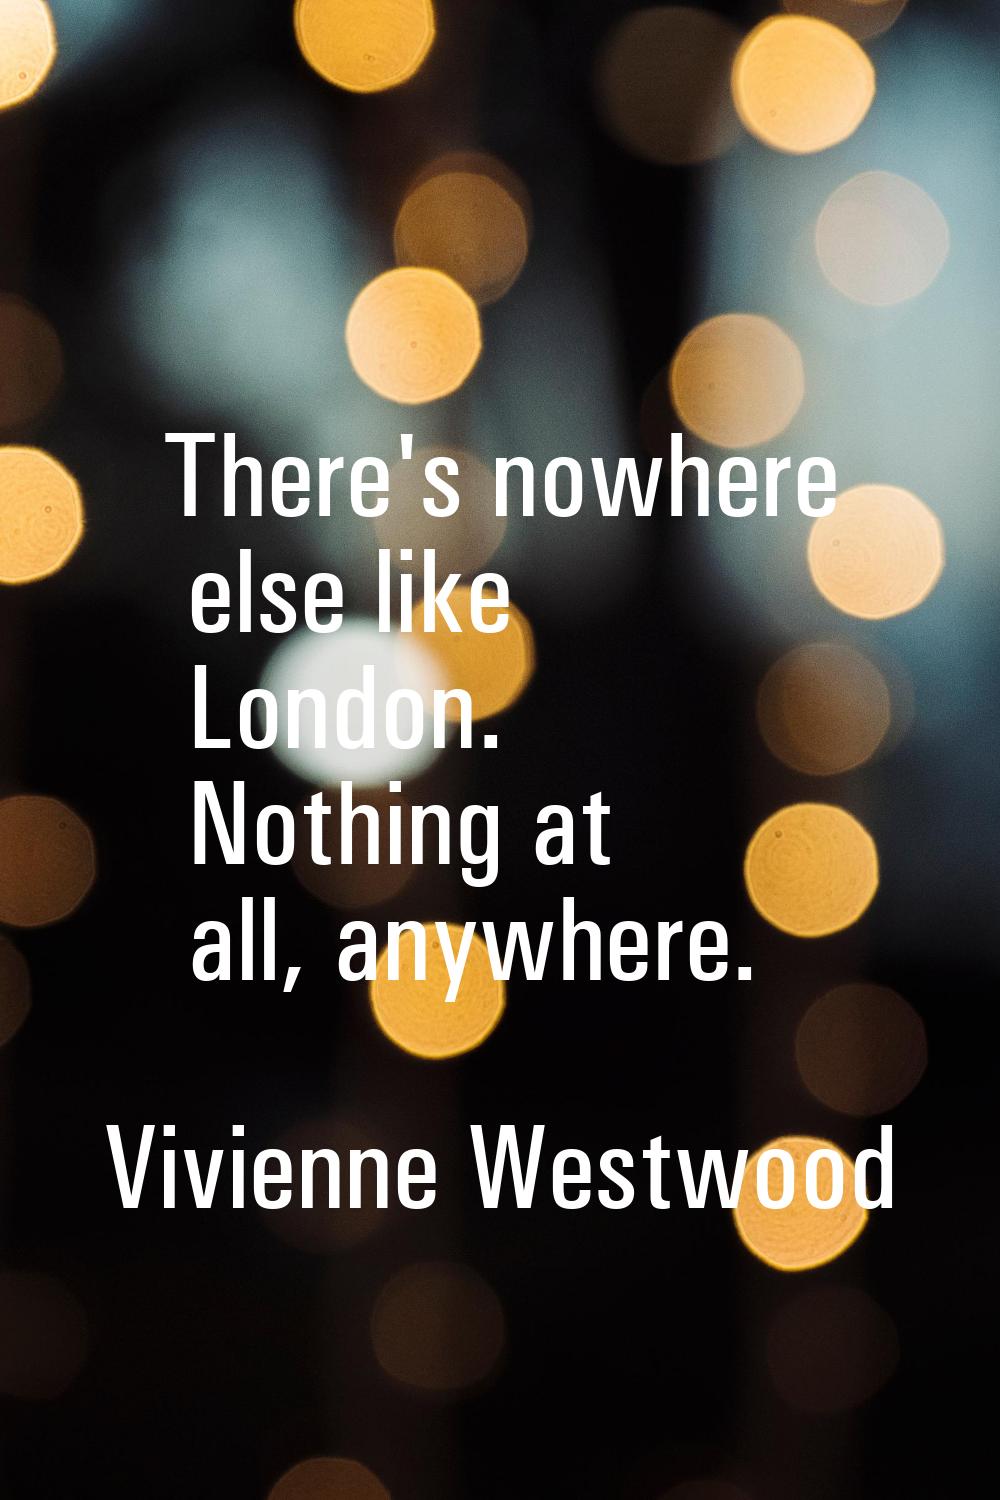 There's nowhere else like London. Nothing at all, anywhere.